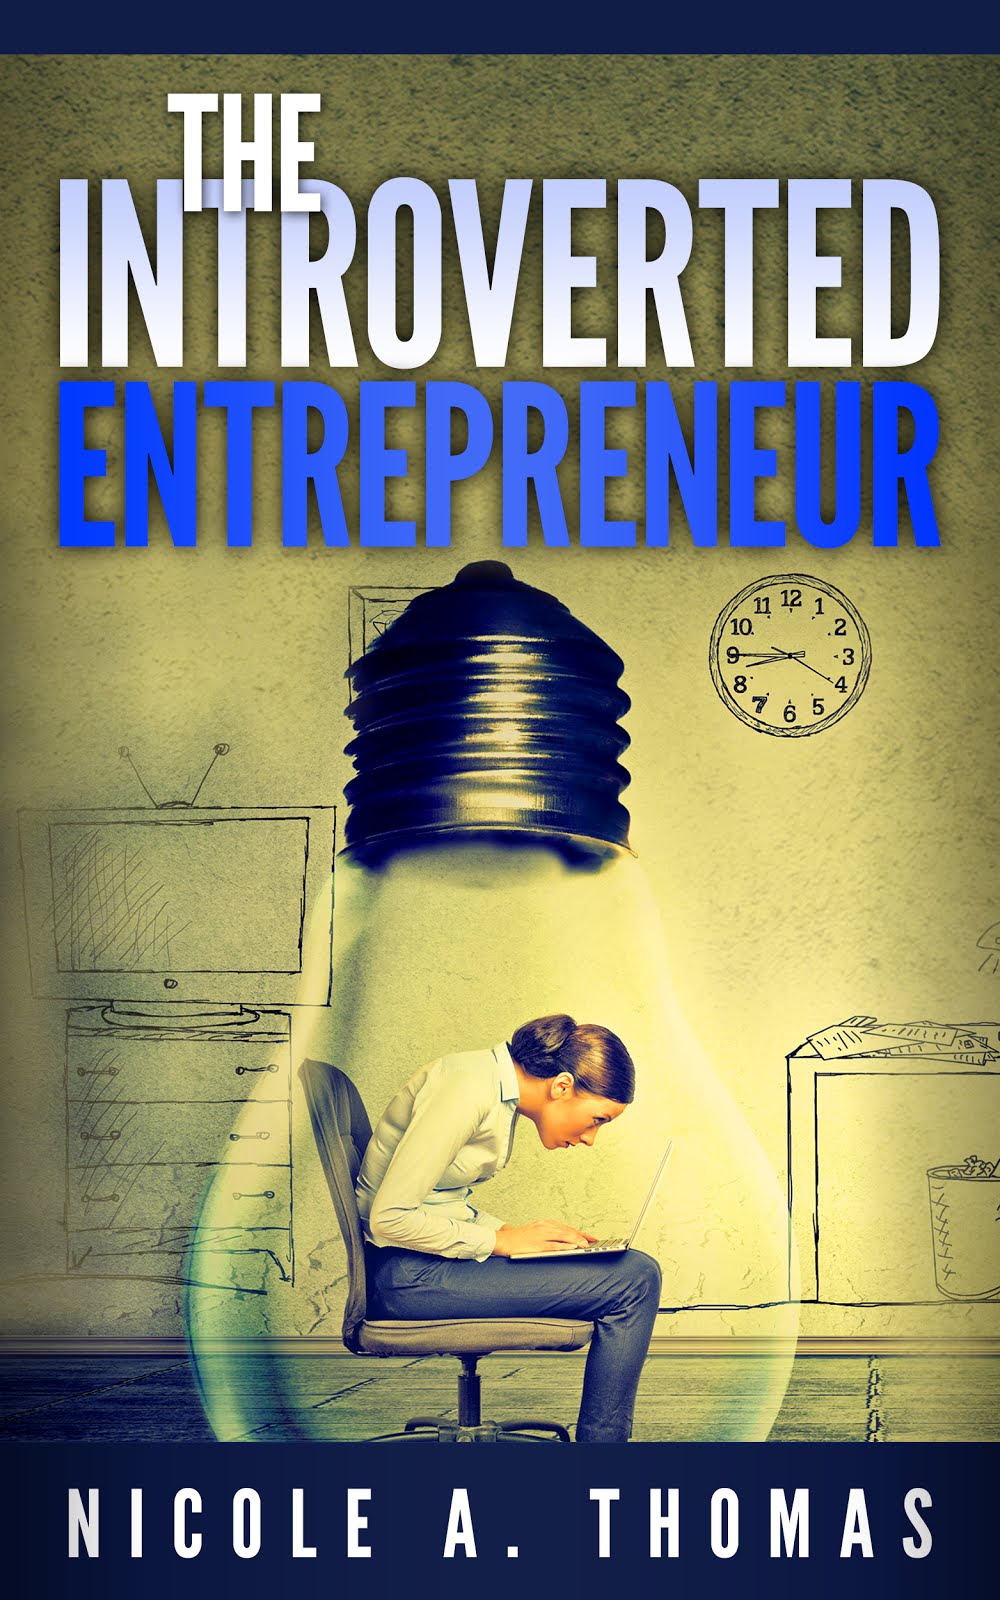 If you love the book Entrepreneur School For Kids, You may also enjoy The Introverted Entrepreneur!